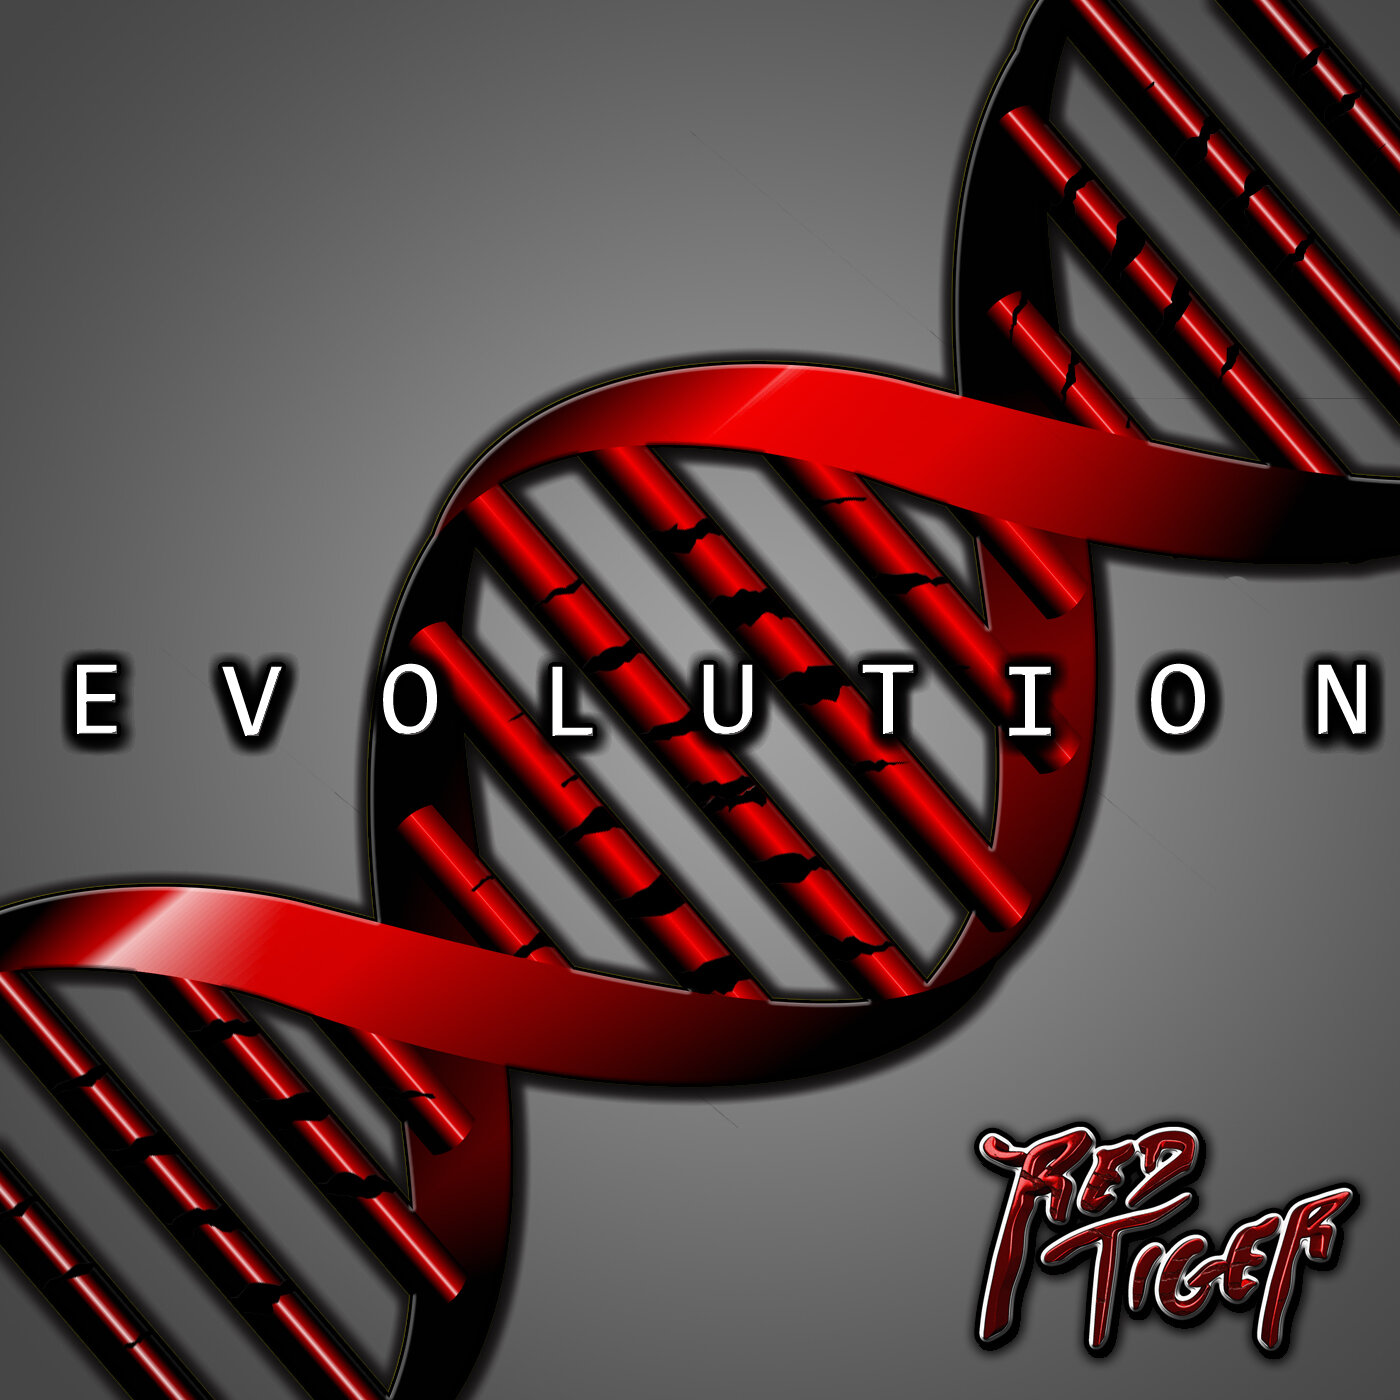 Red again. Red Tiger - Evolution 2018. Change of Heart - last Tiger (2016). Change of Heart last Tiger.